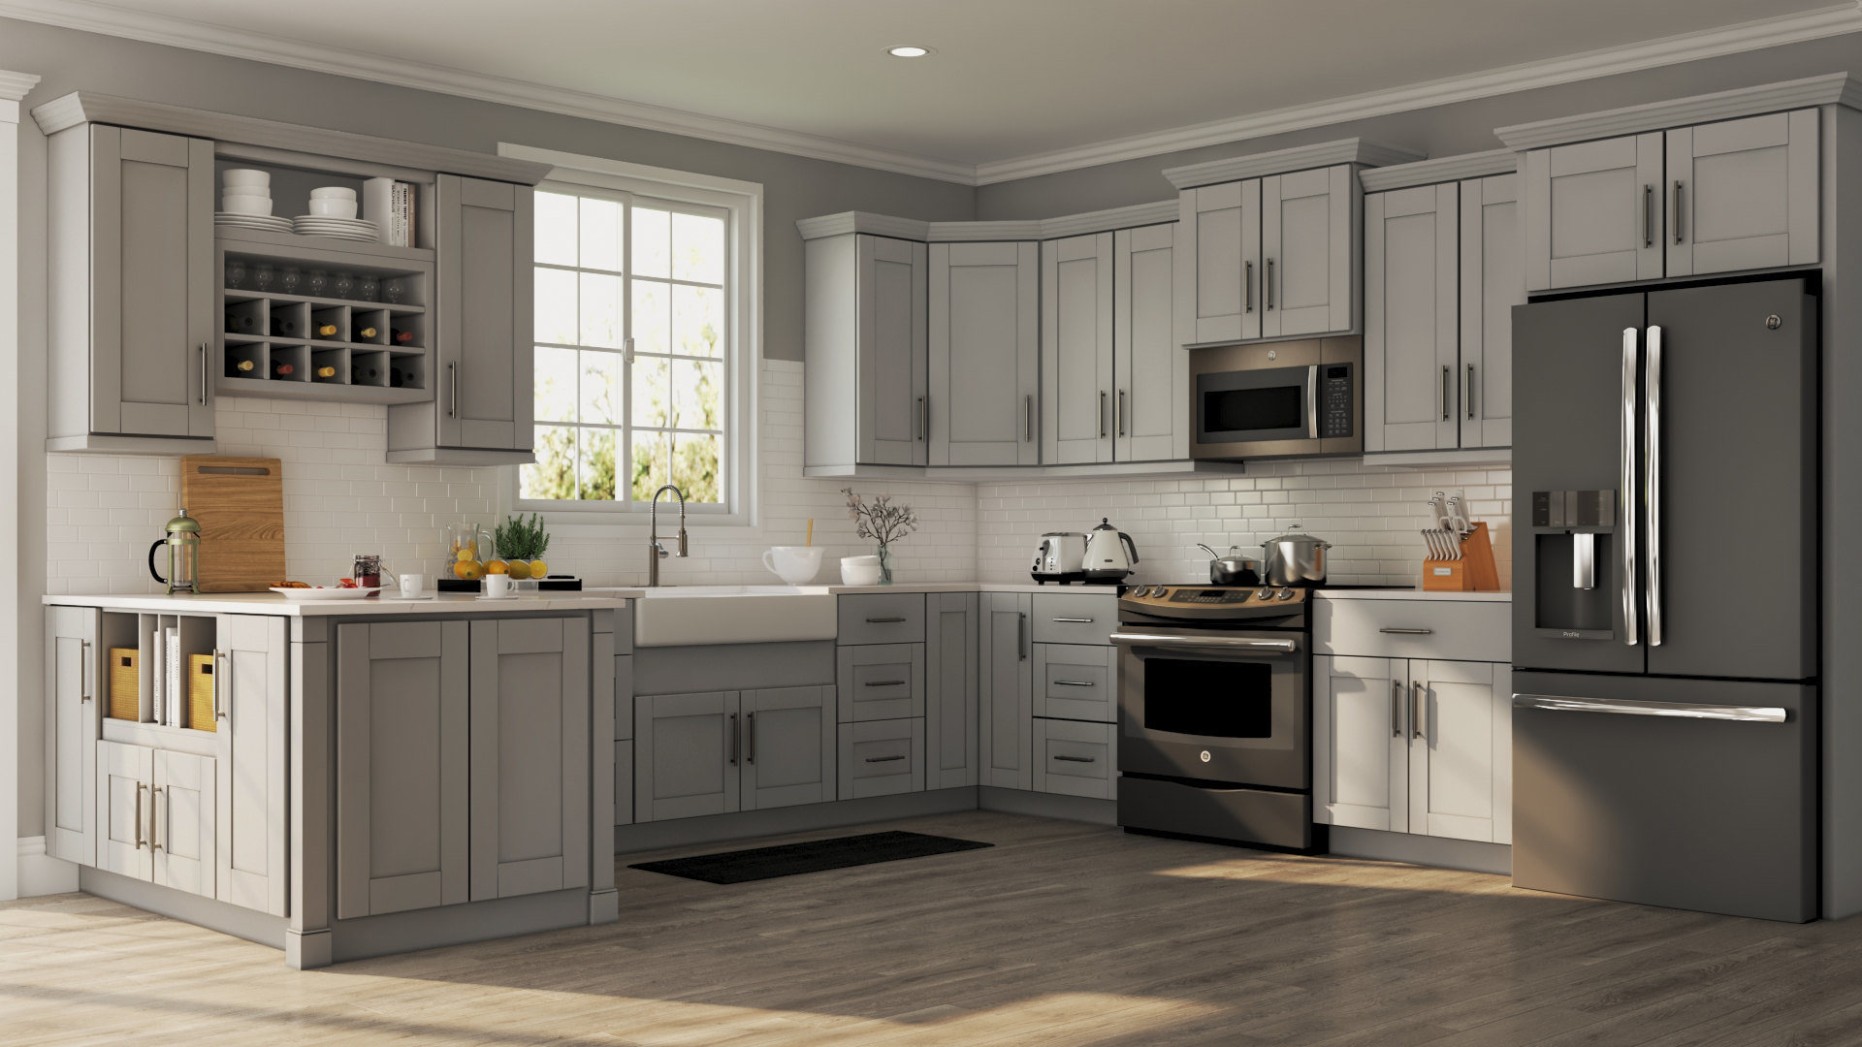 Shaker Wall Cabinets in Dove Gray – Kitchen – The Home Depot - dove grey kitchen cabinets